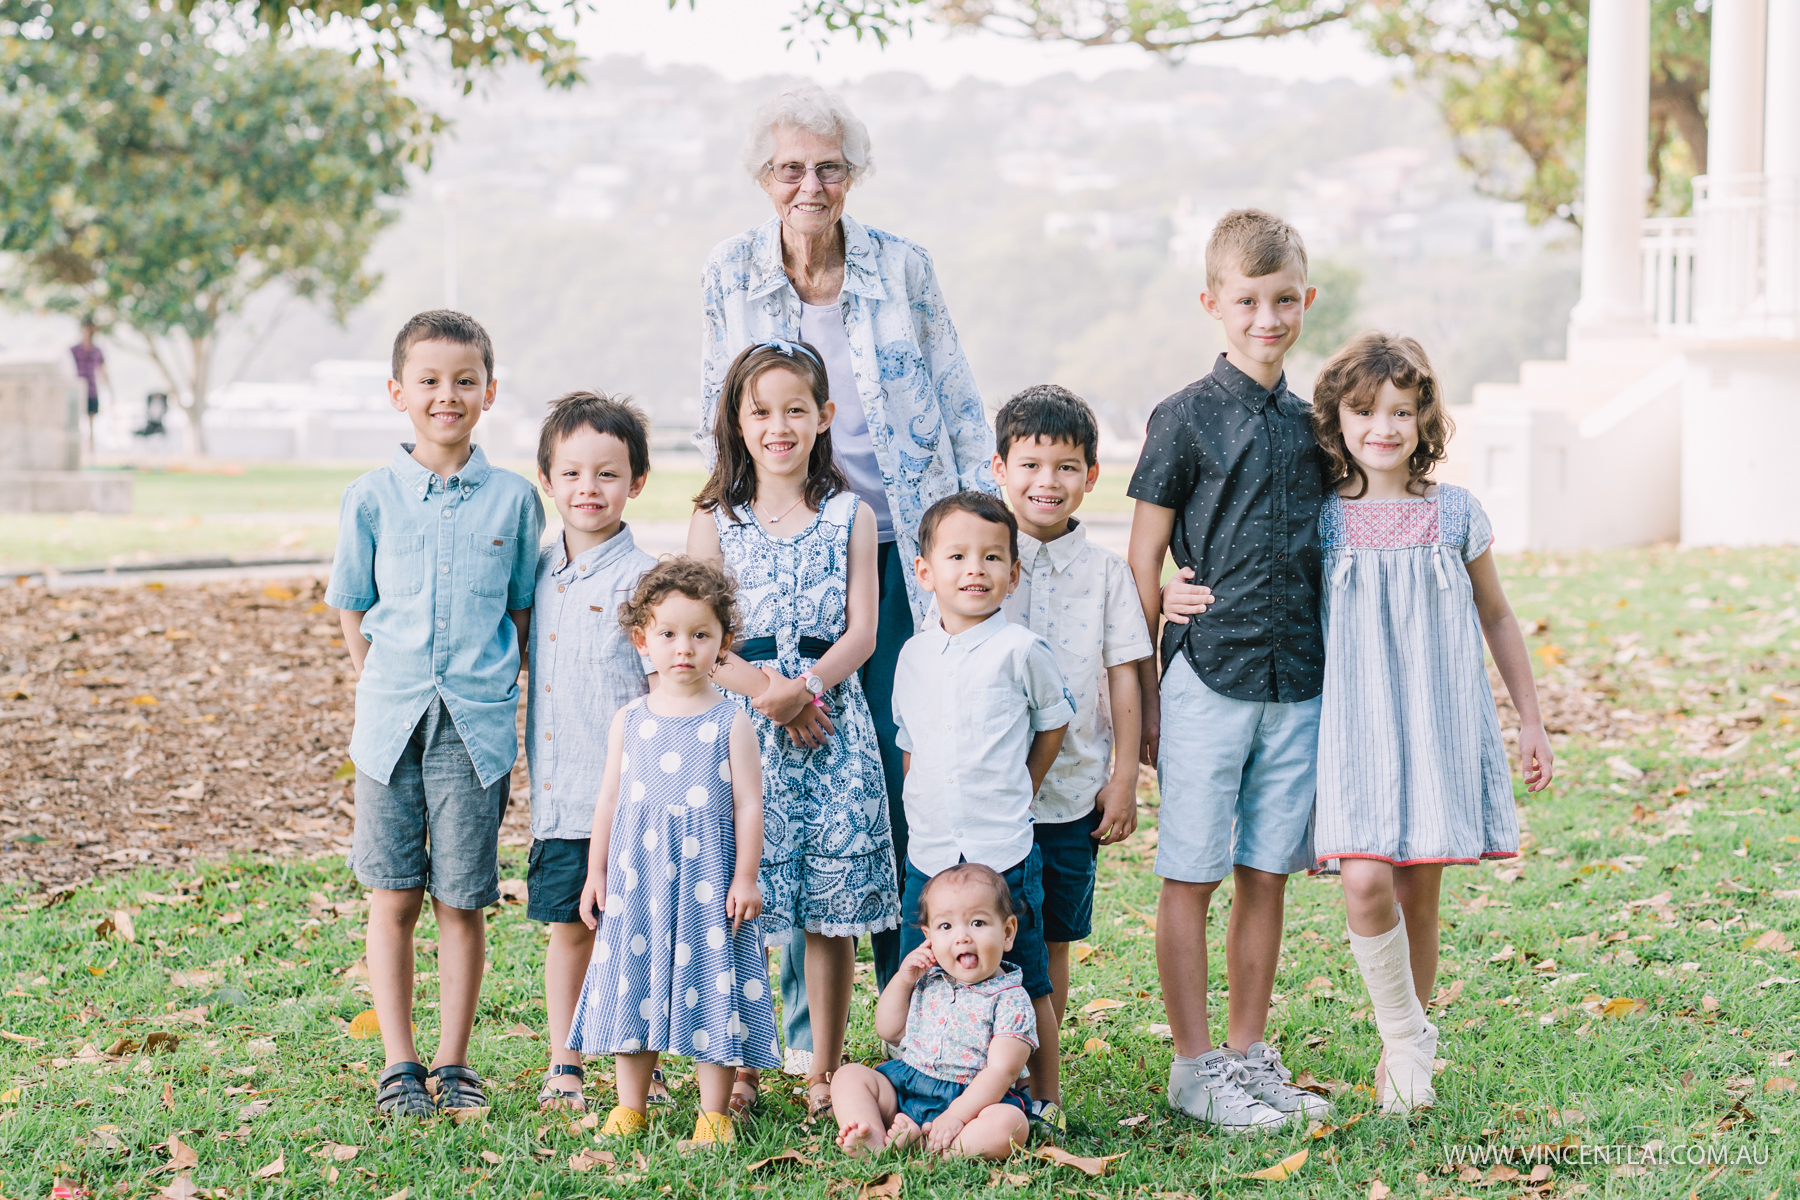 Extended Family Photo Session at Balmoral Beach Mosman